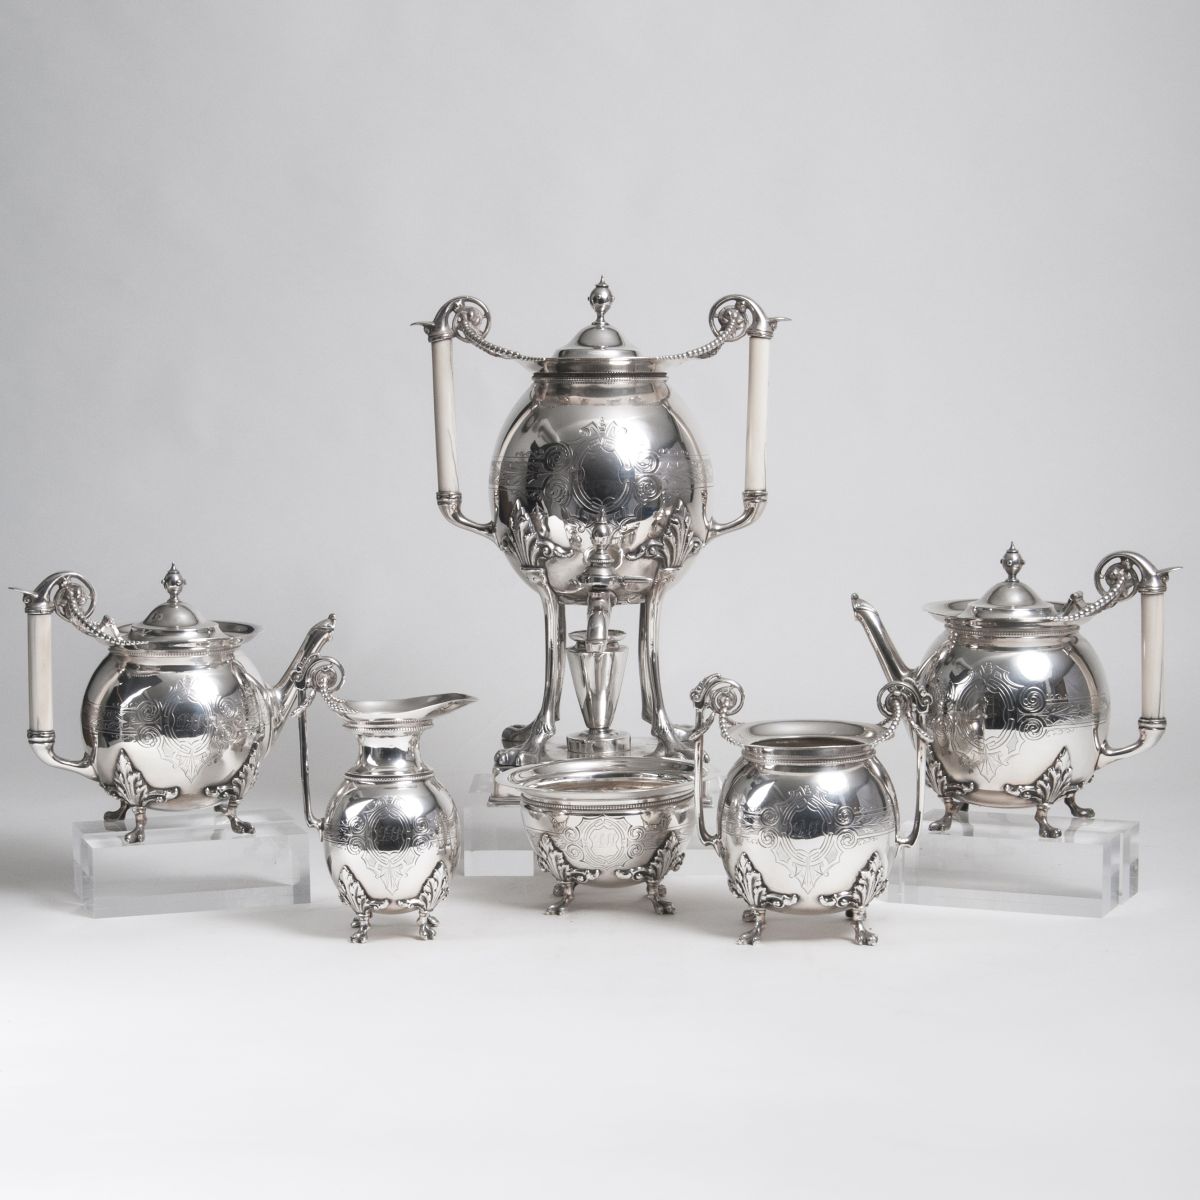 A rare american Vintage coffee and tea service with large samovar